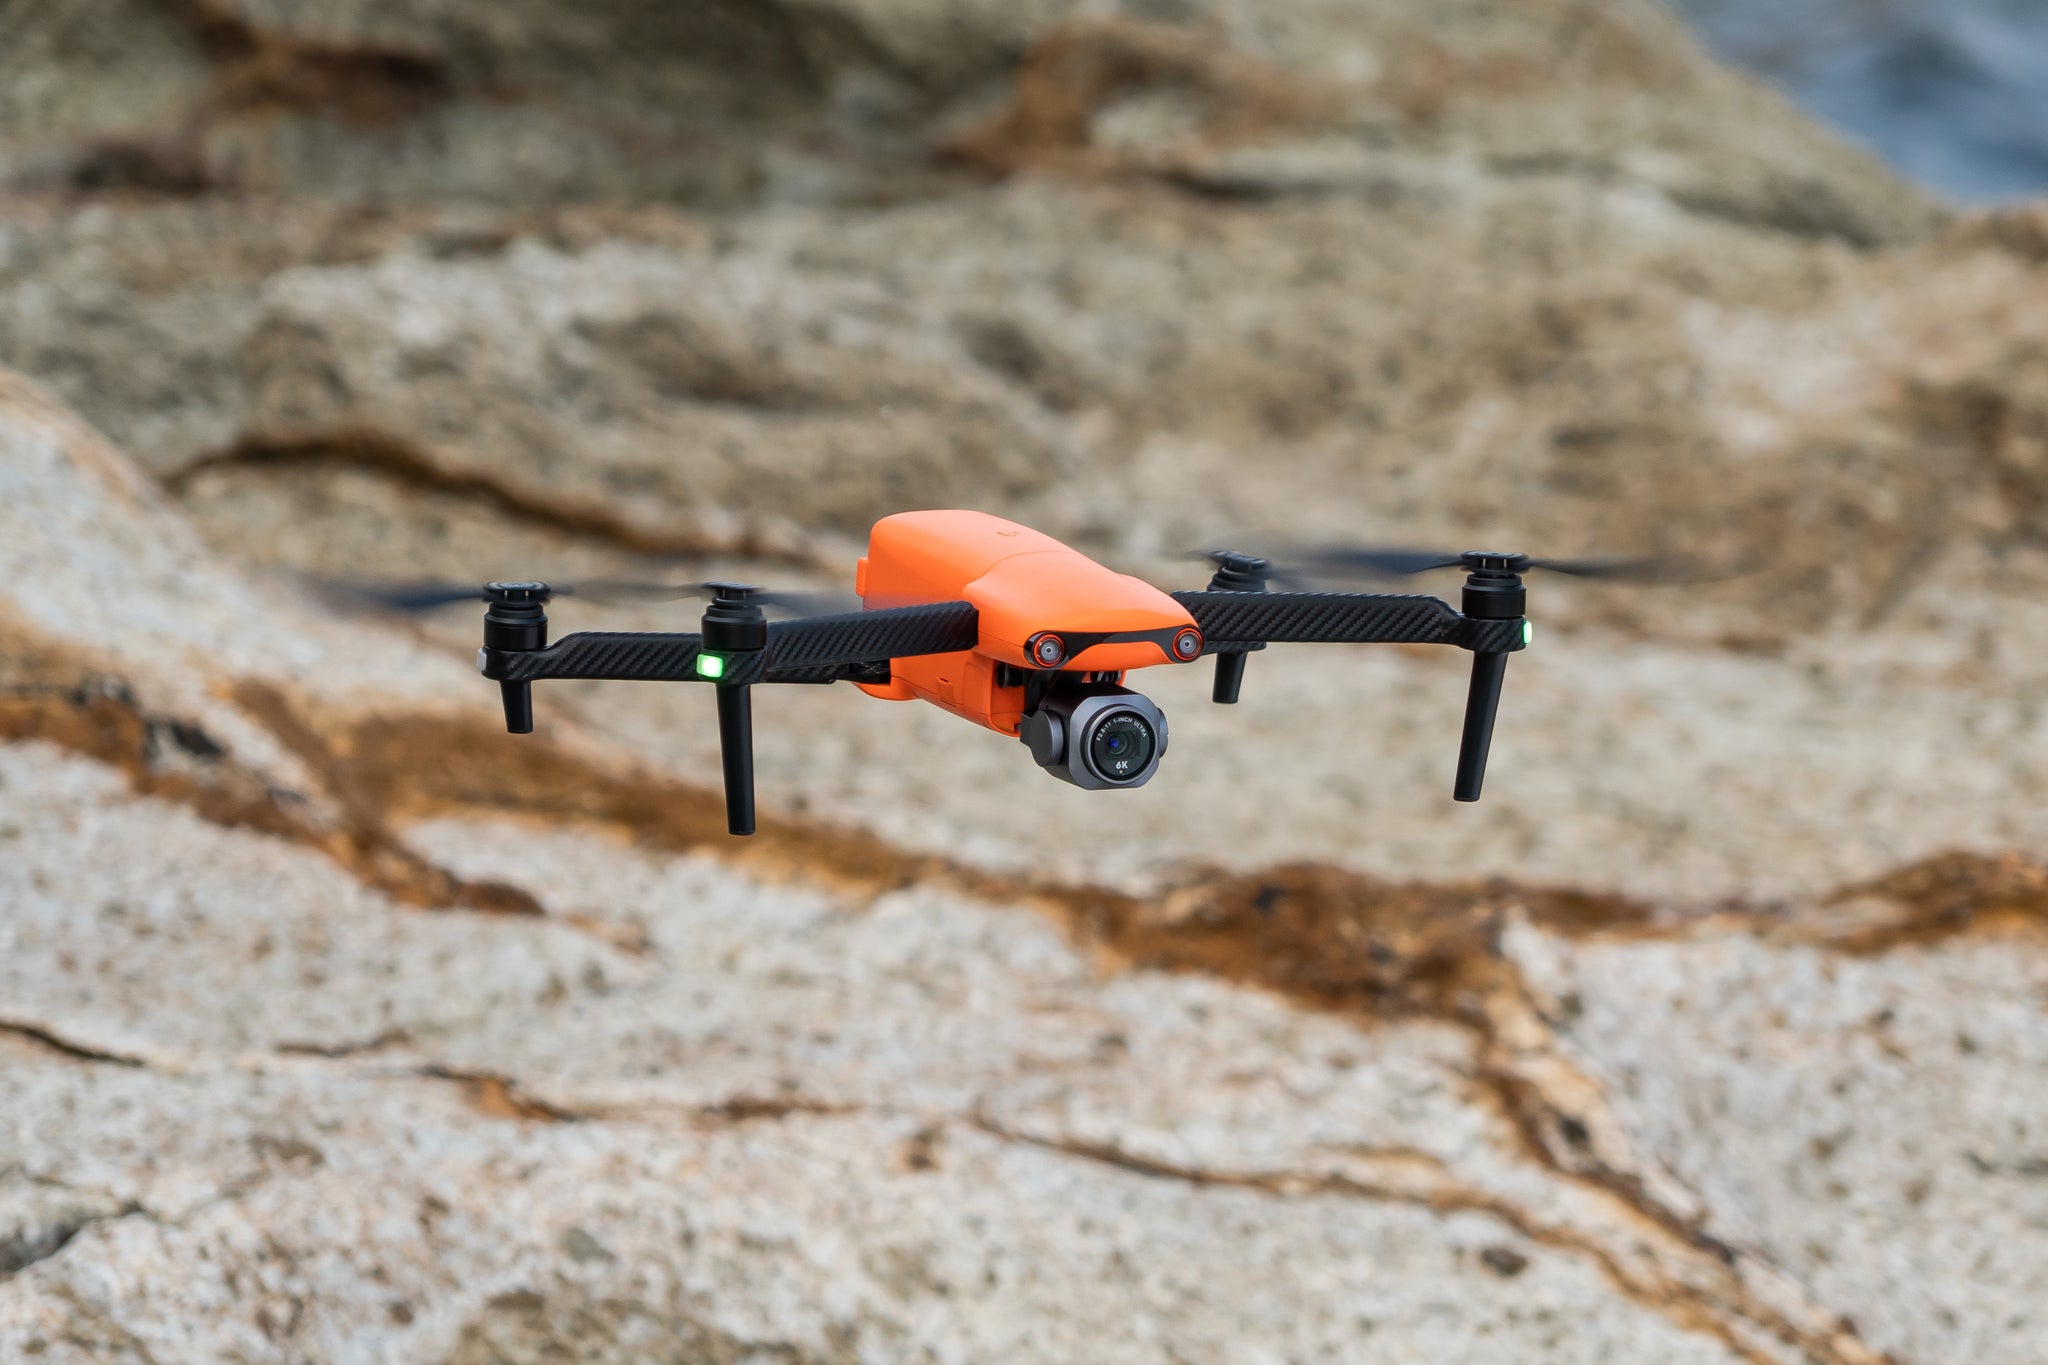 The EVO Lite Drone Series Importance of Firmware Upgrade & Buy Premium Bundle for Accessories